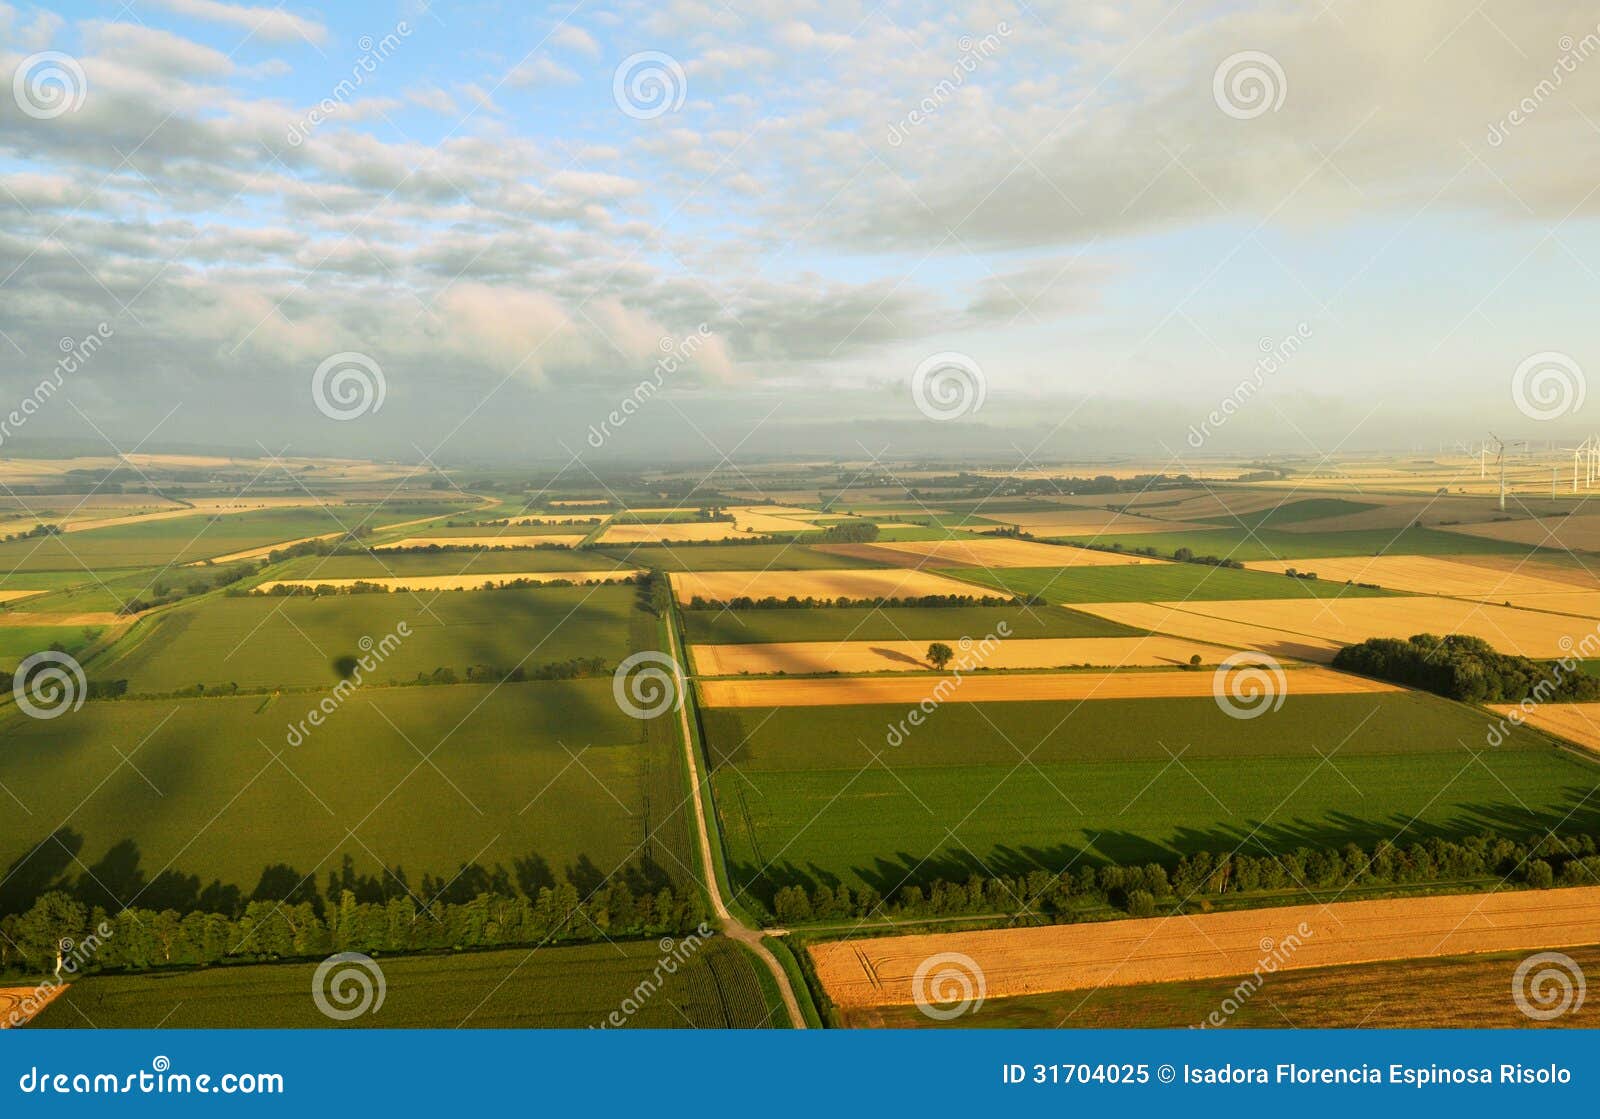 agriculture land from the sky in germany